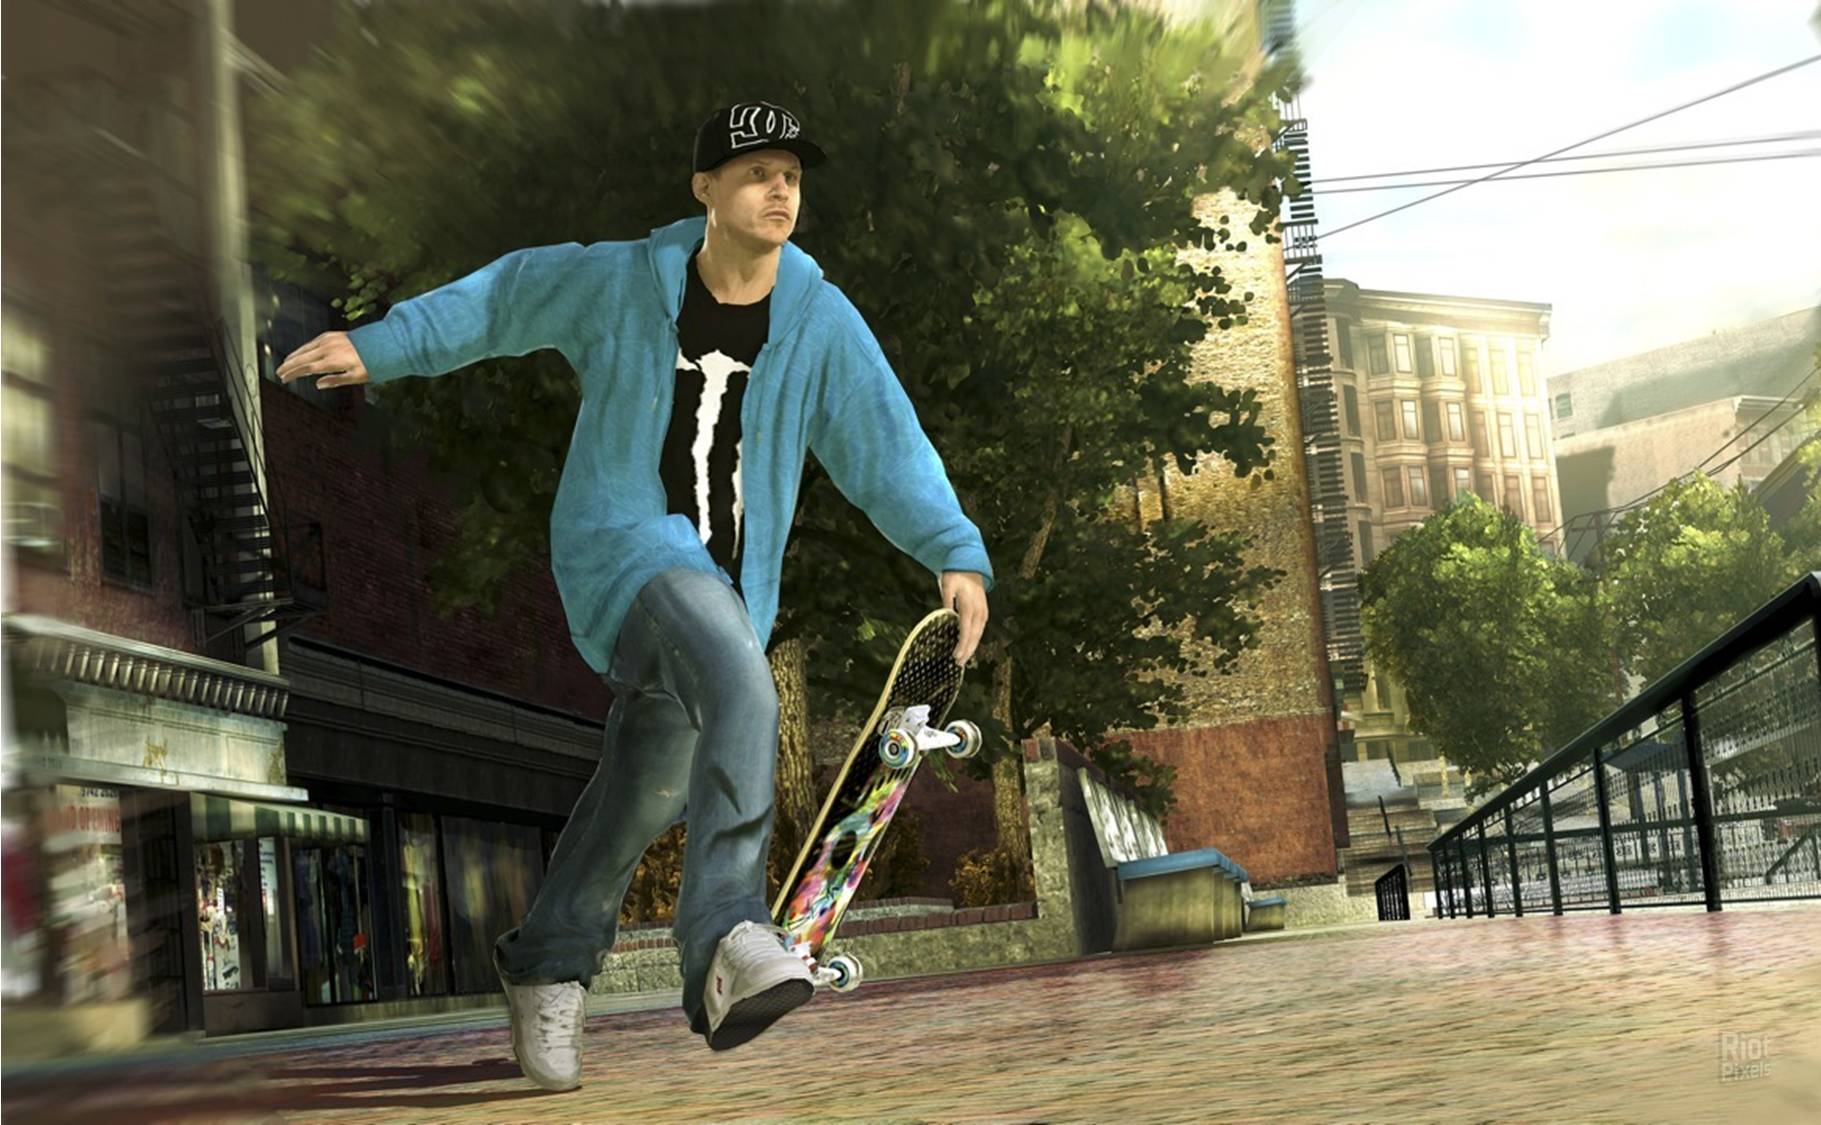 skate 3 pc dont need to downlaod